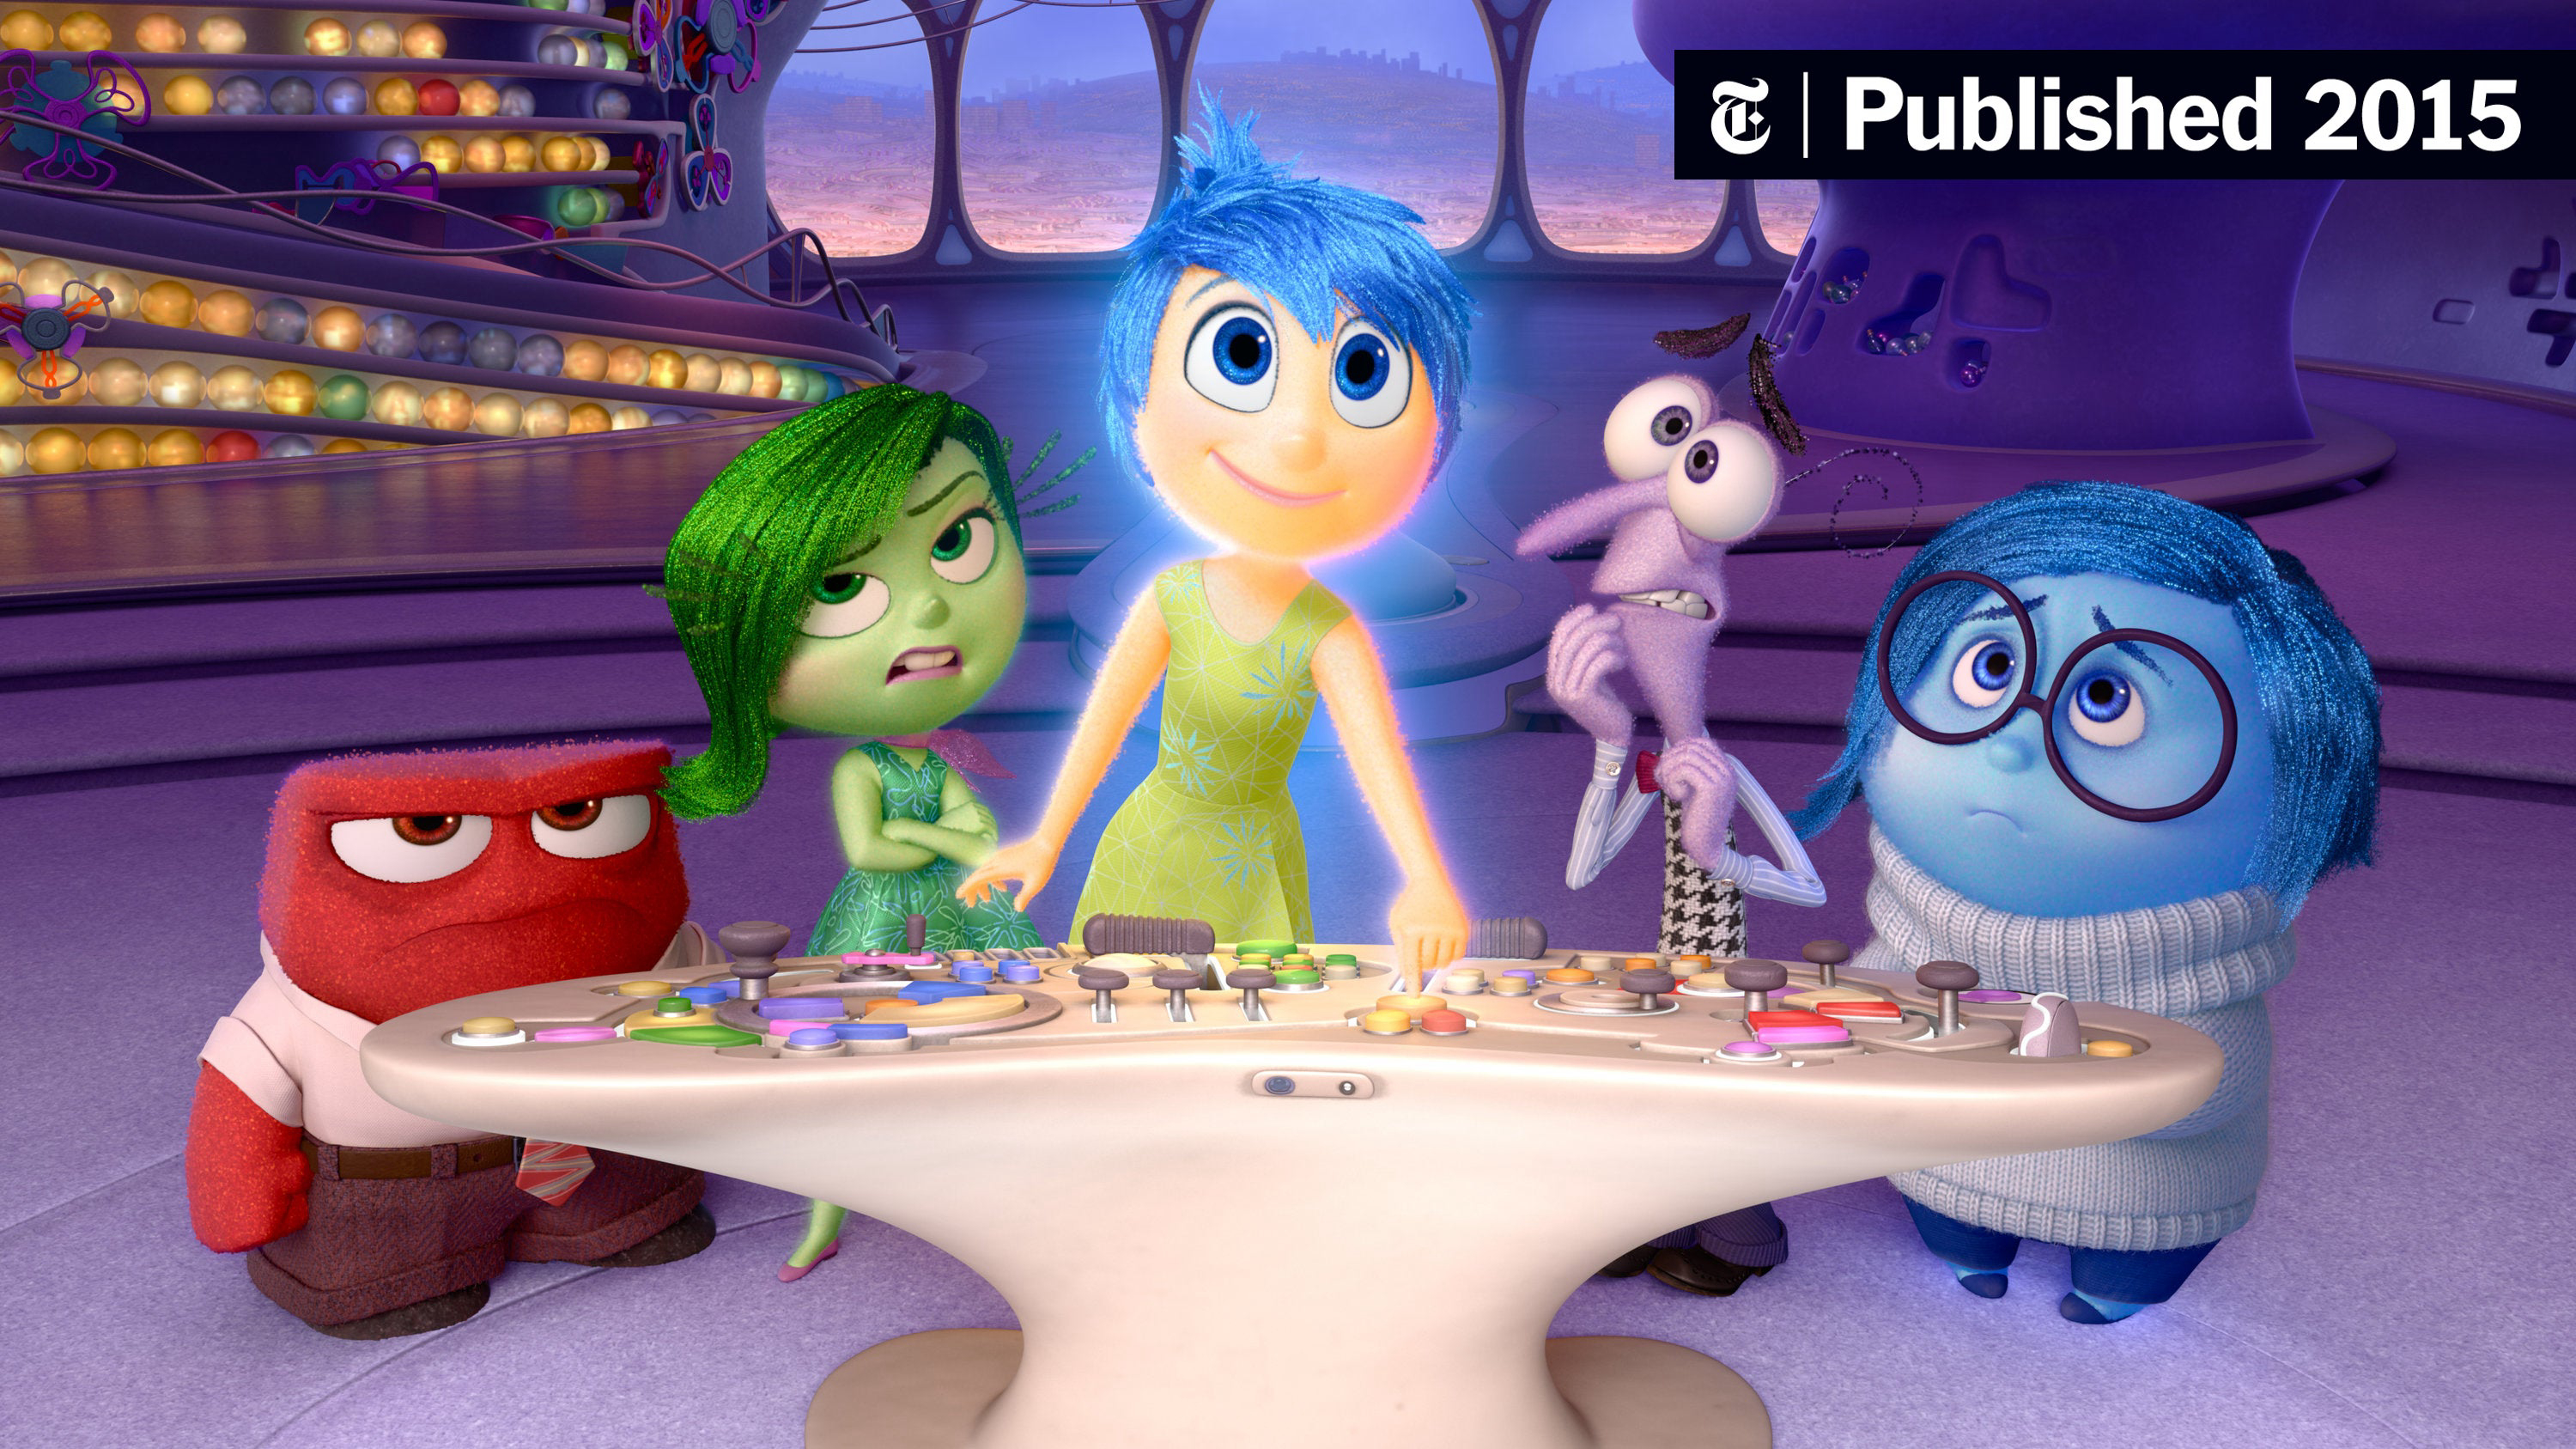 Inside Out - Inside Out (2015)